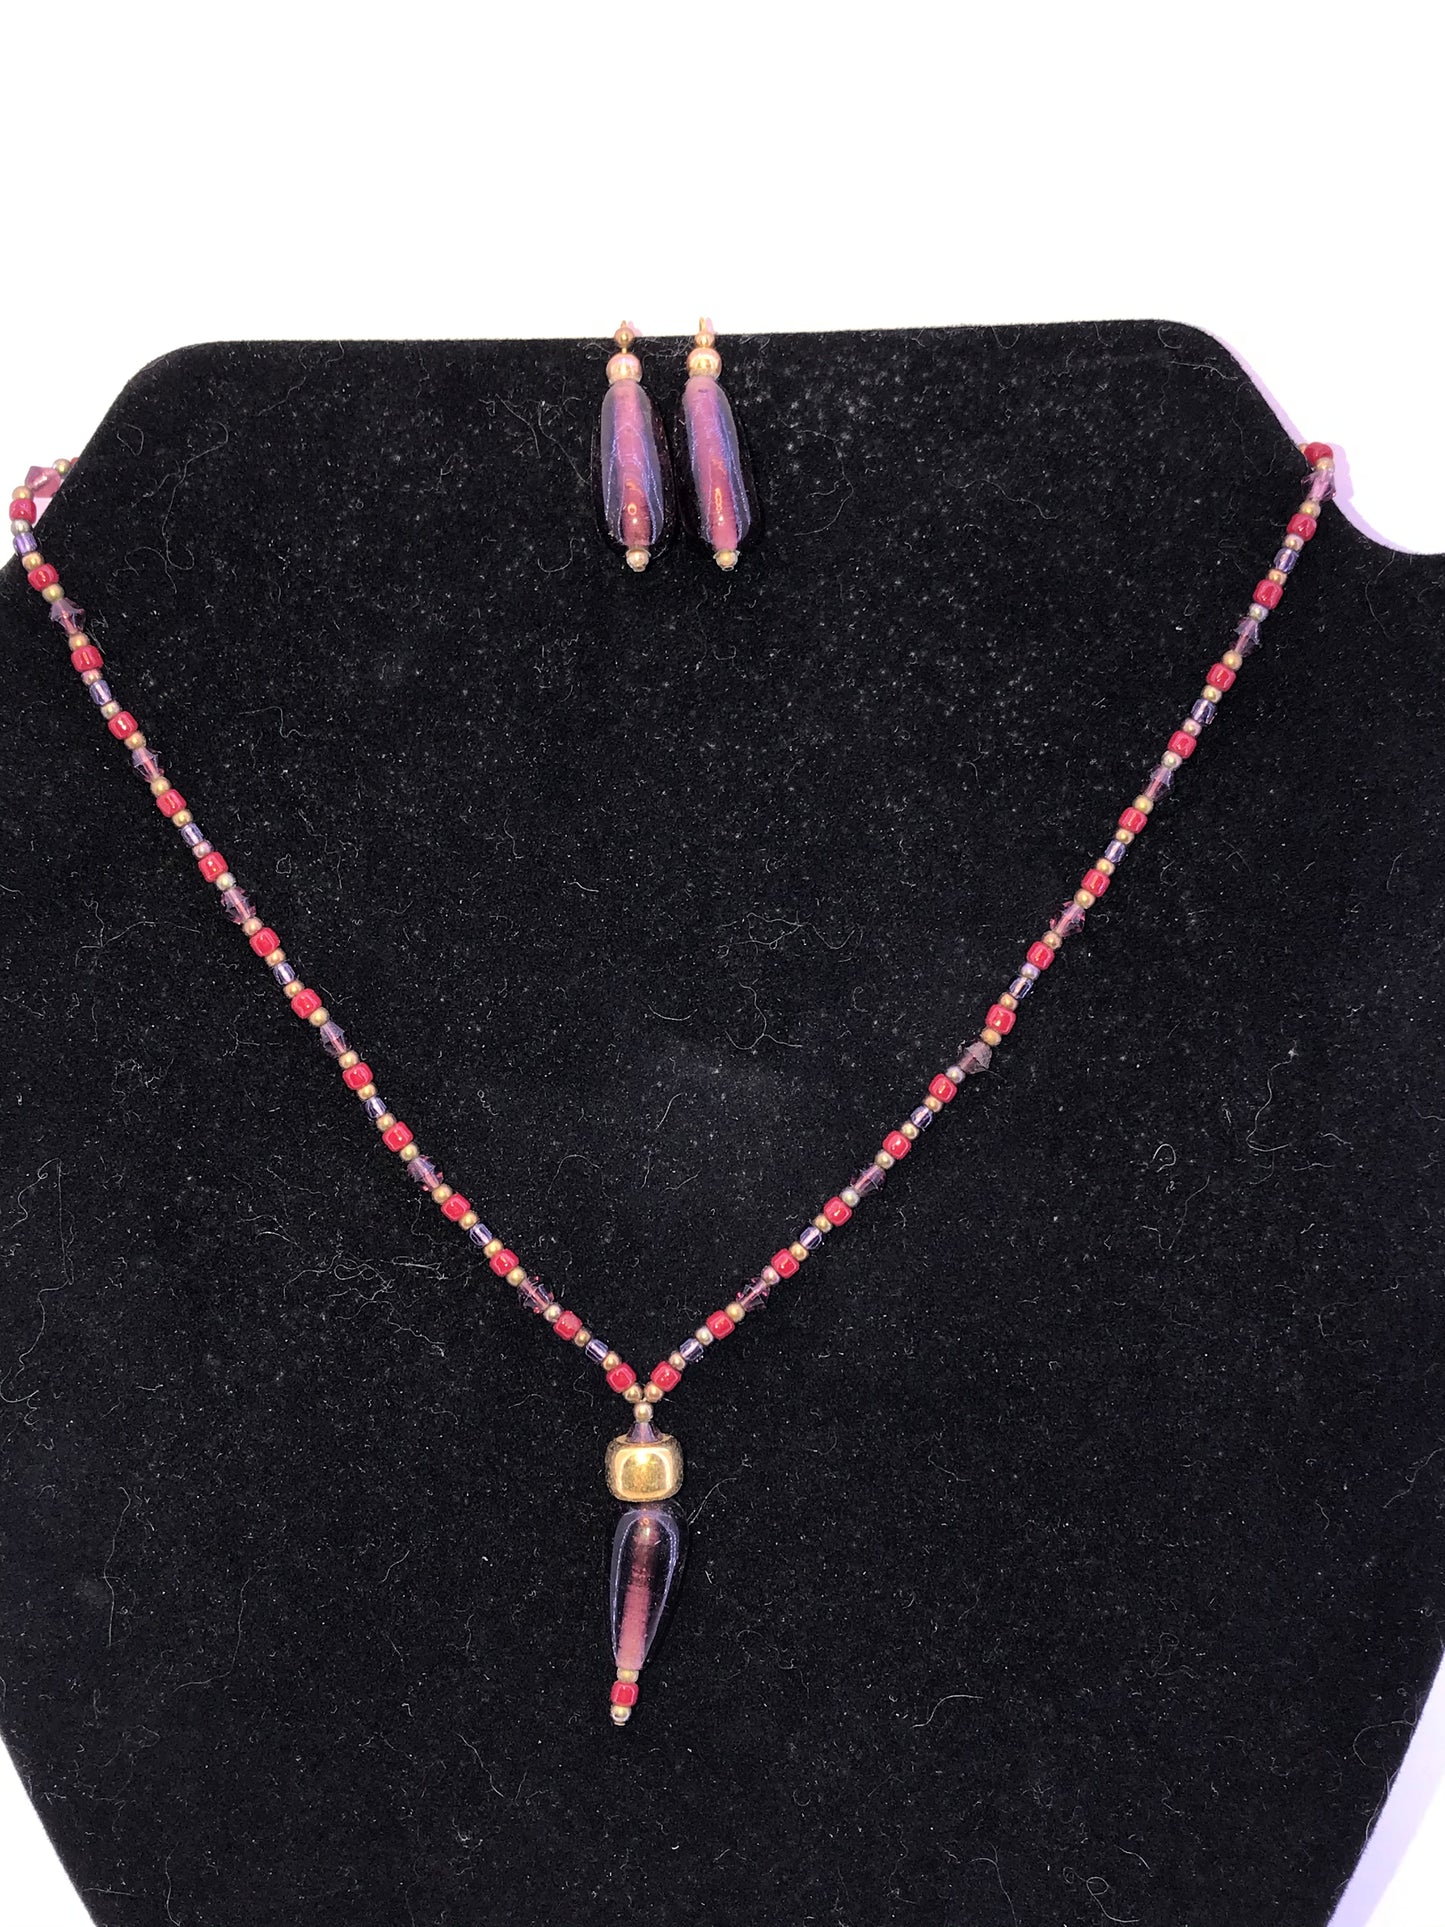 16 3/4" Red And Purple Beaded Necklace with Matching Earrings